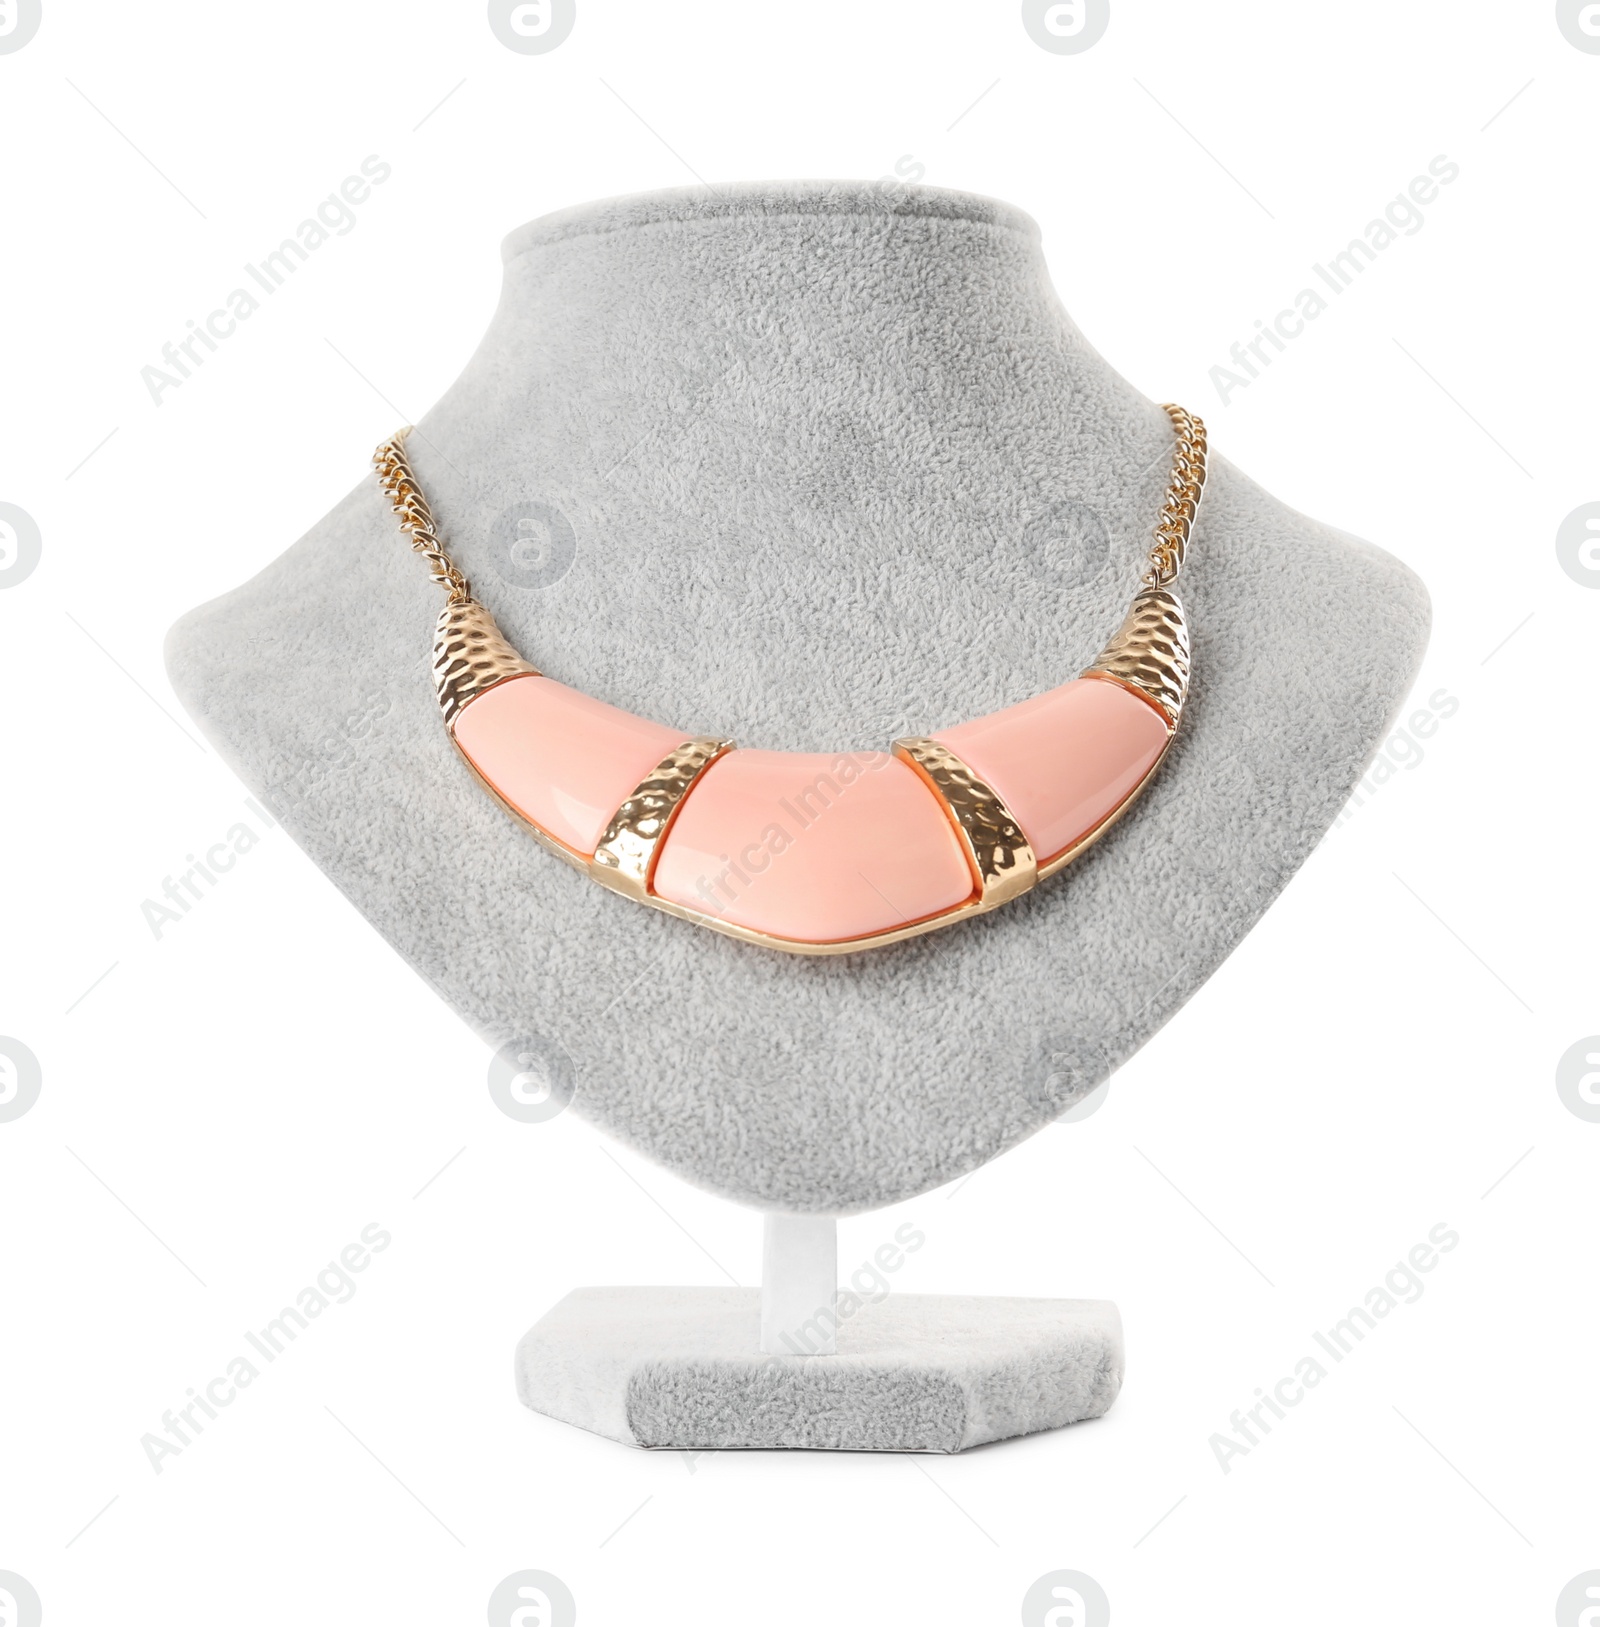 Photo of Stylish necklace with gemstones on jewelry bust against white background